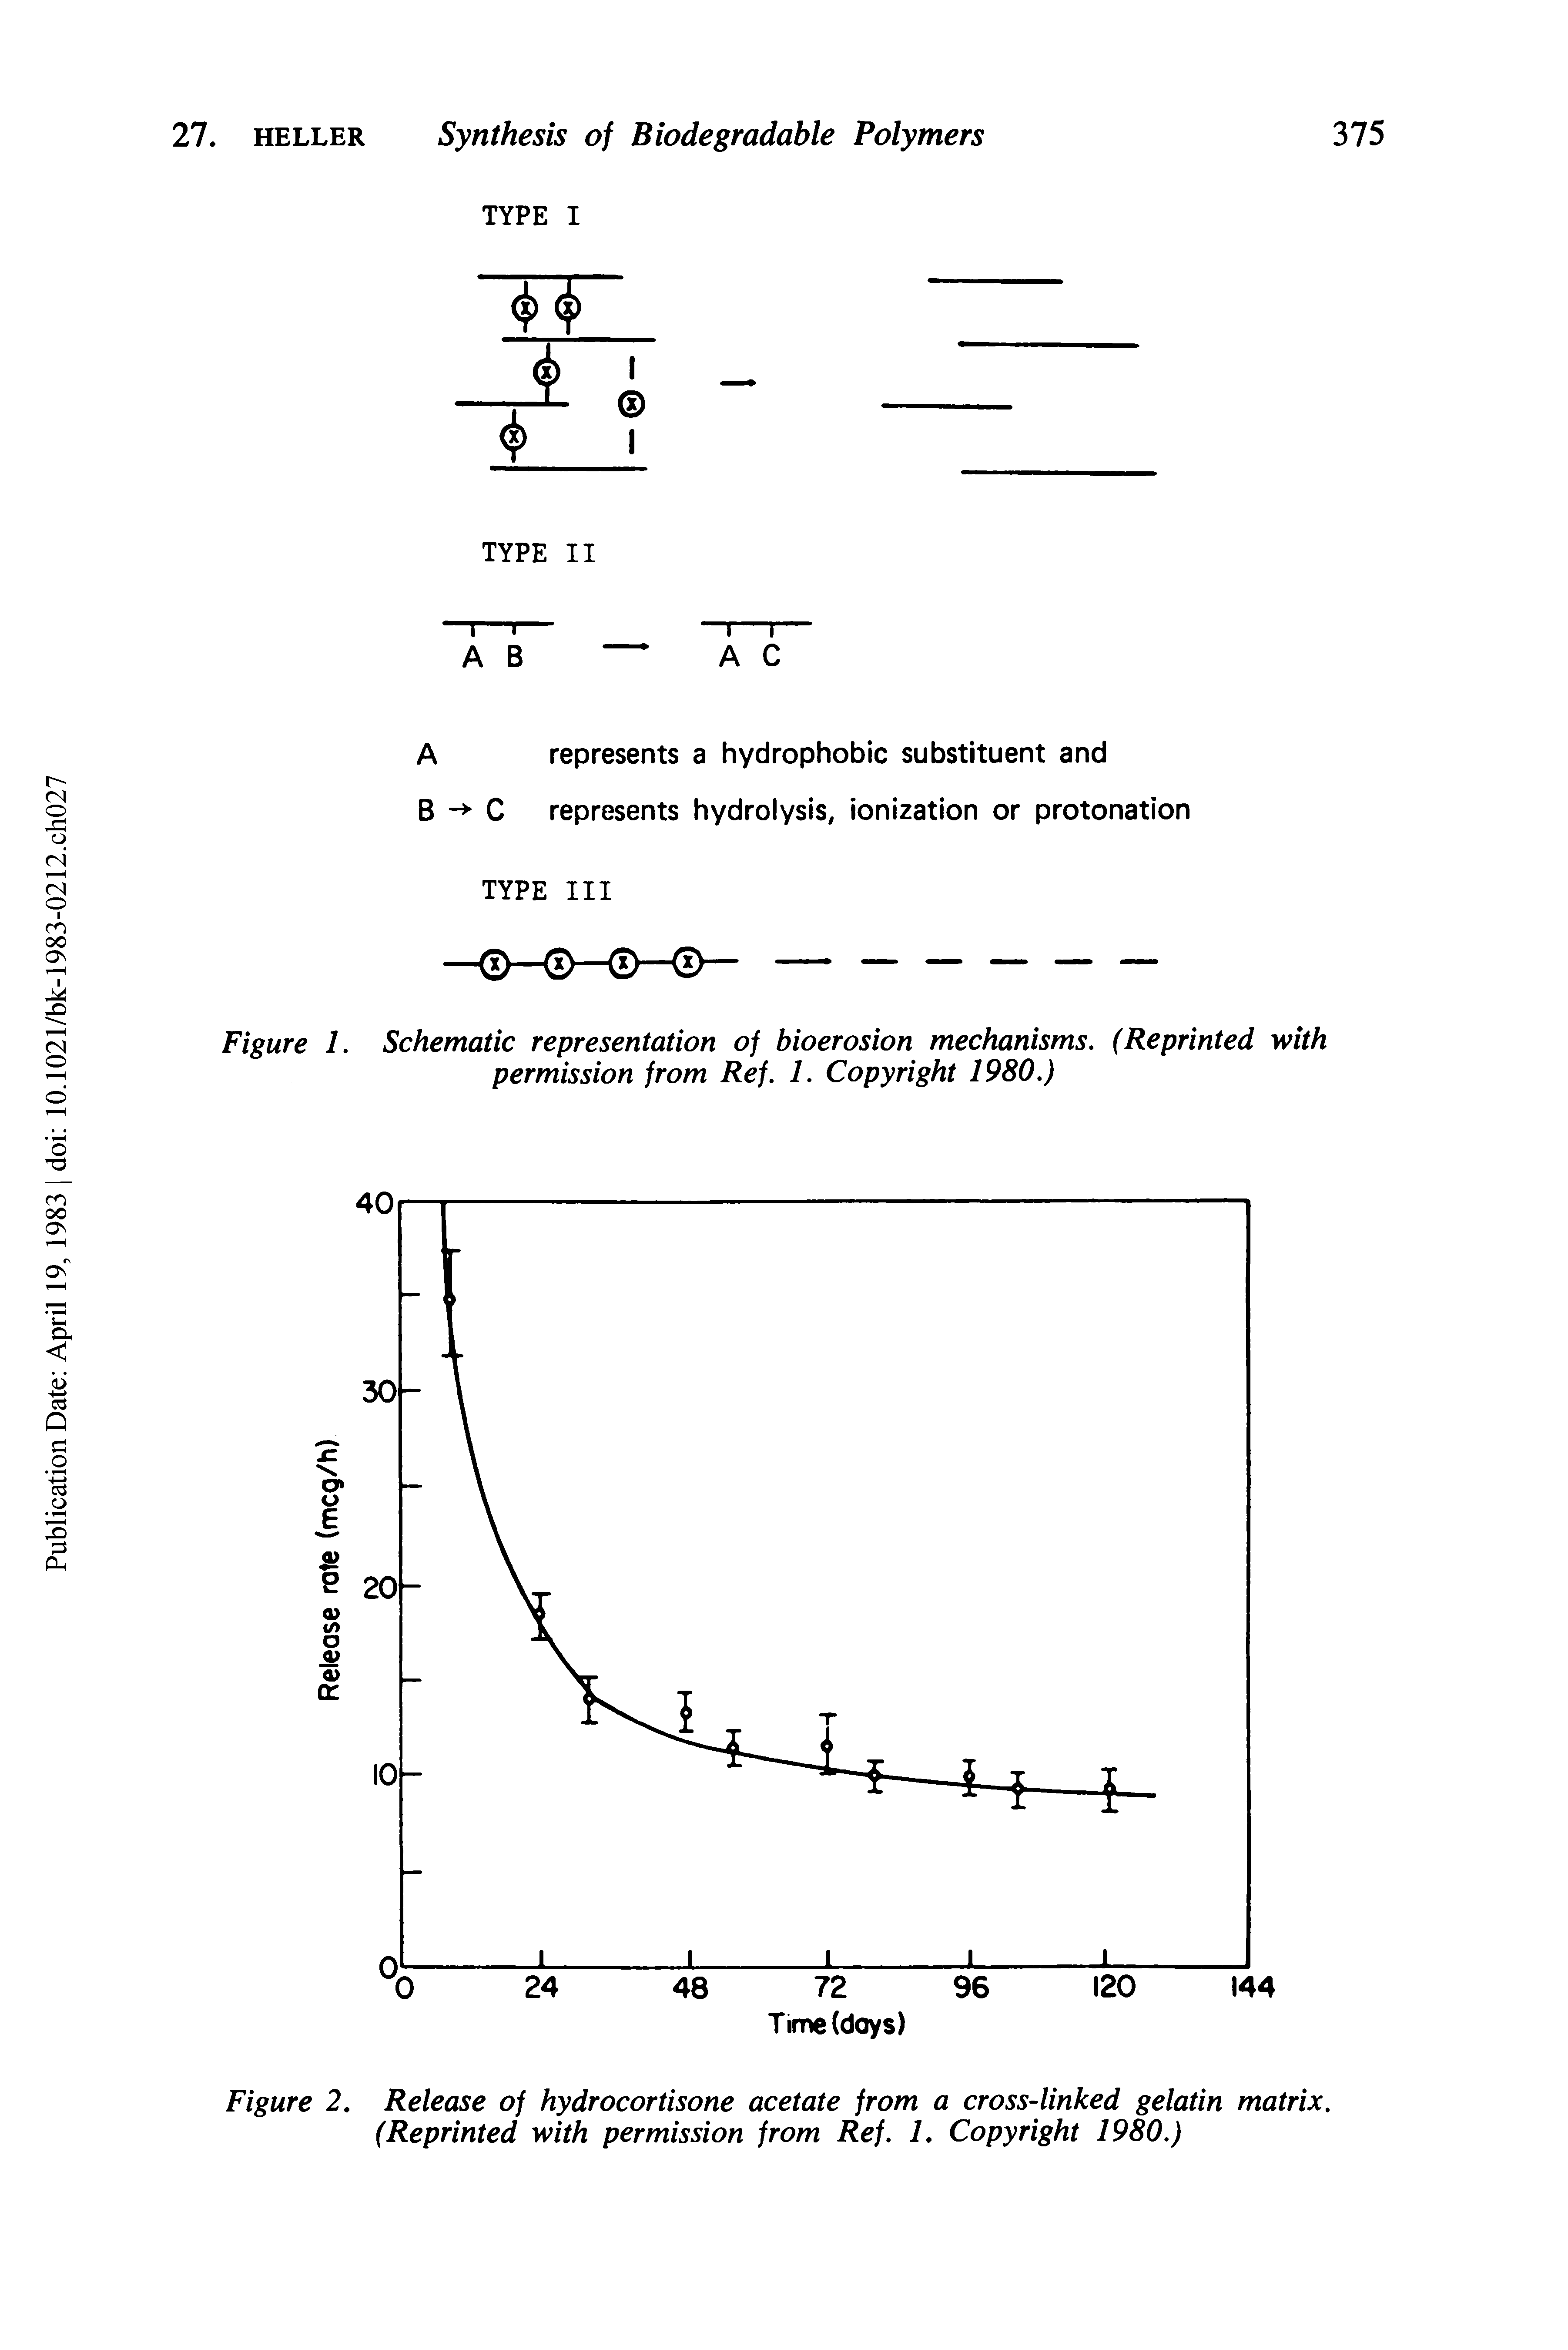 Figure 2. Release of hydrocortisone acetate from a cross-linked gelatin matrix. (Reprinted with permission from Ref. 1, Copyright 1980.)...